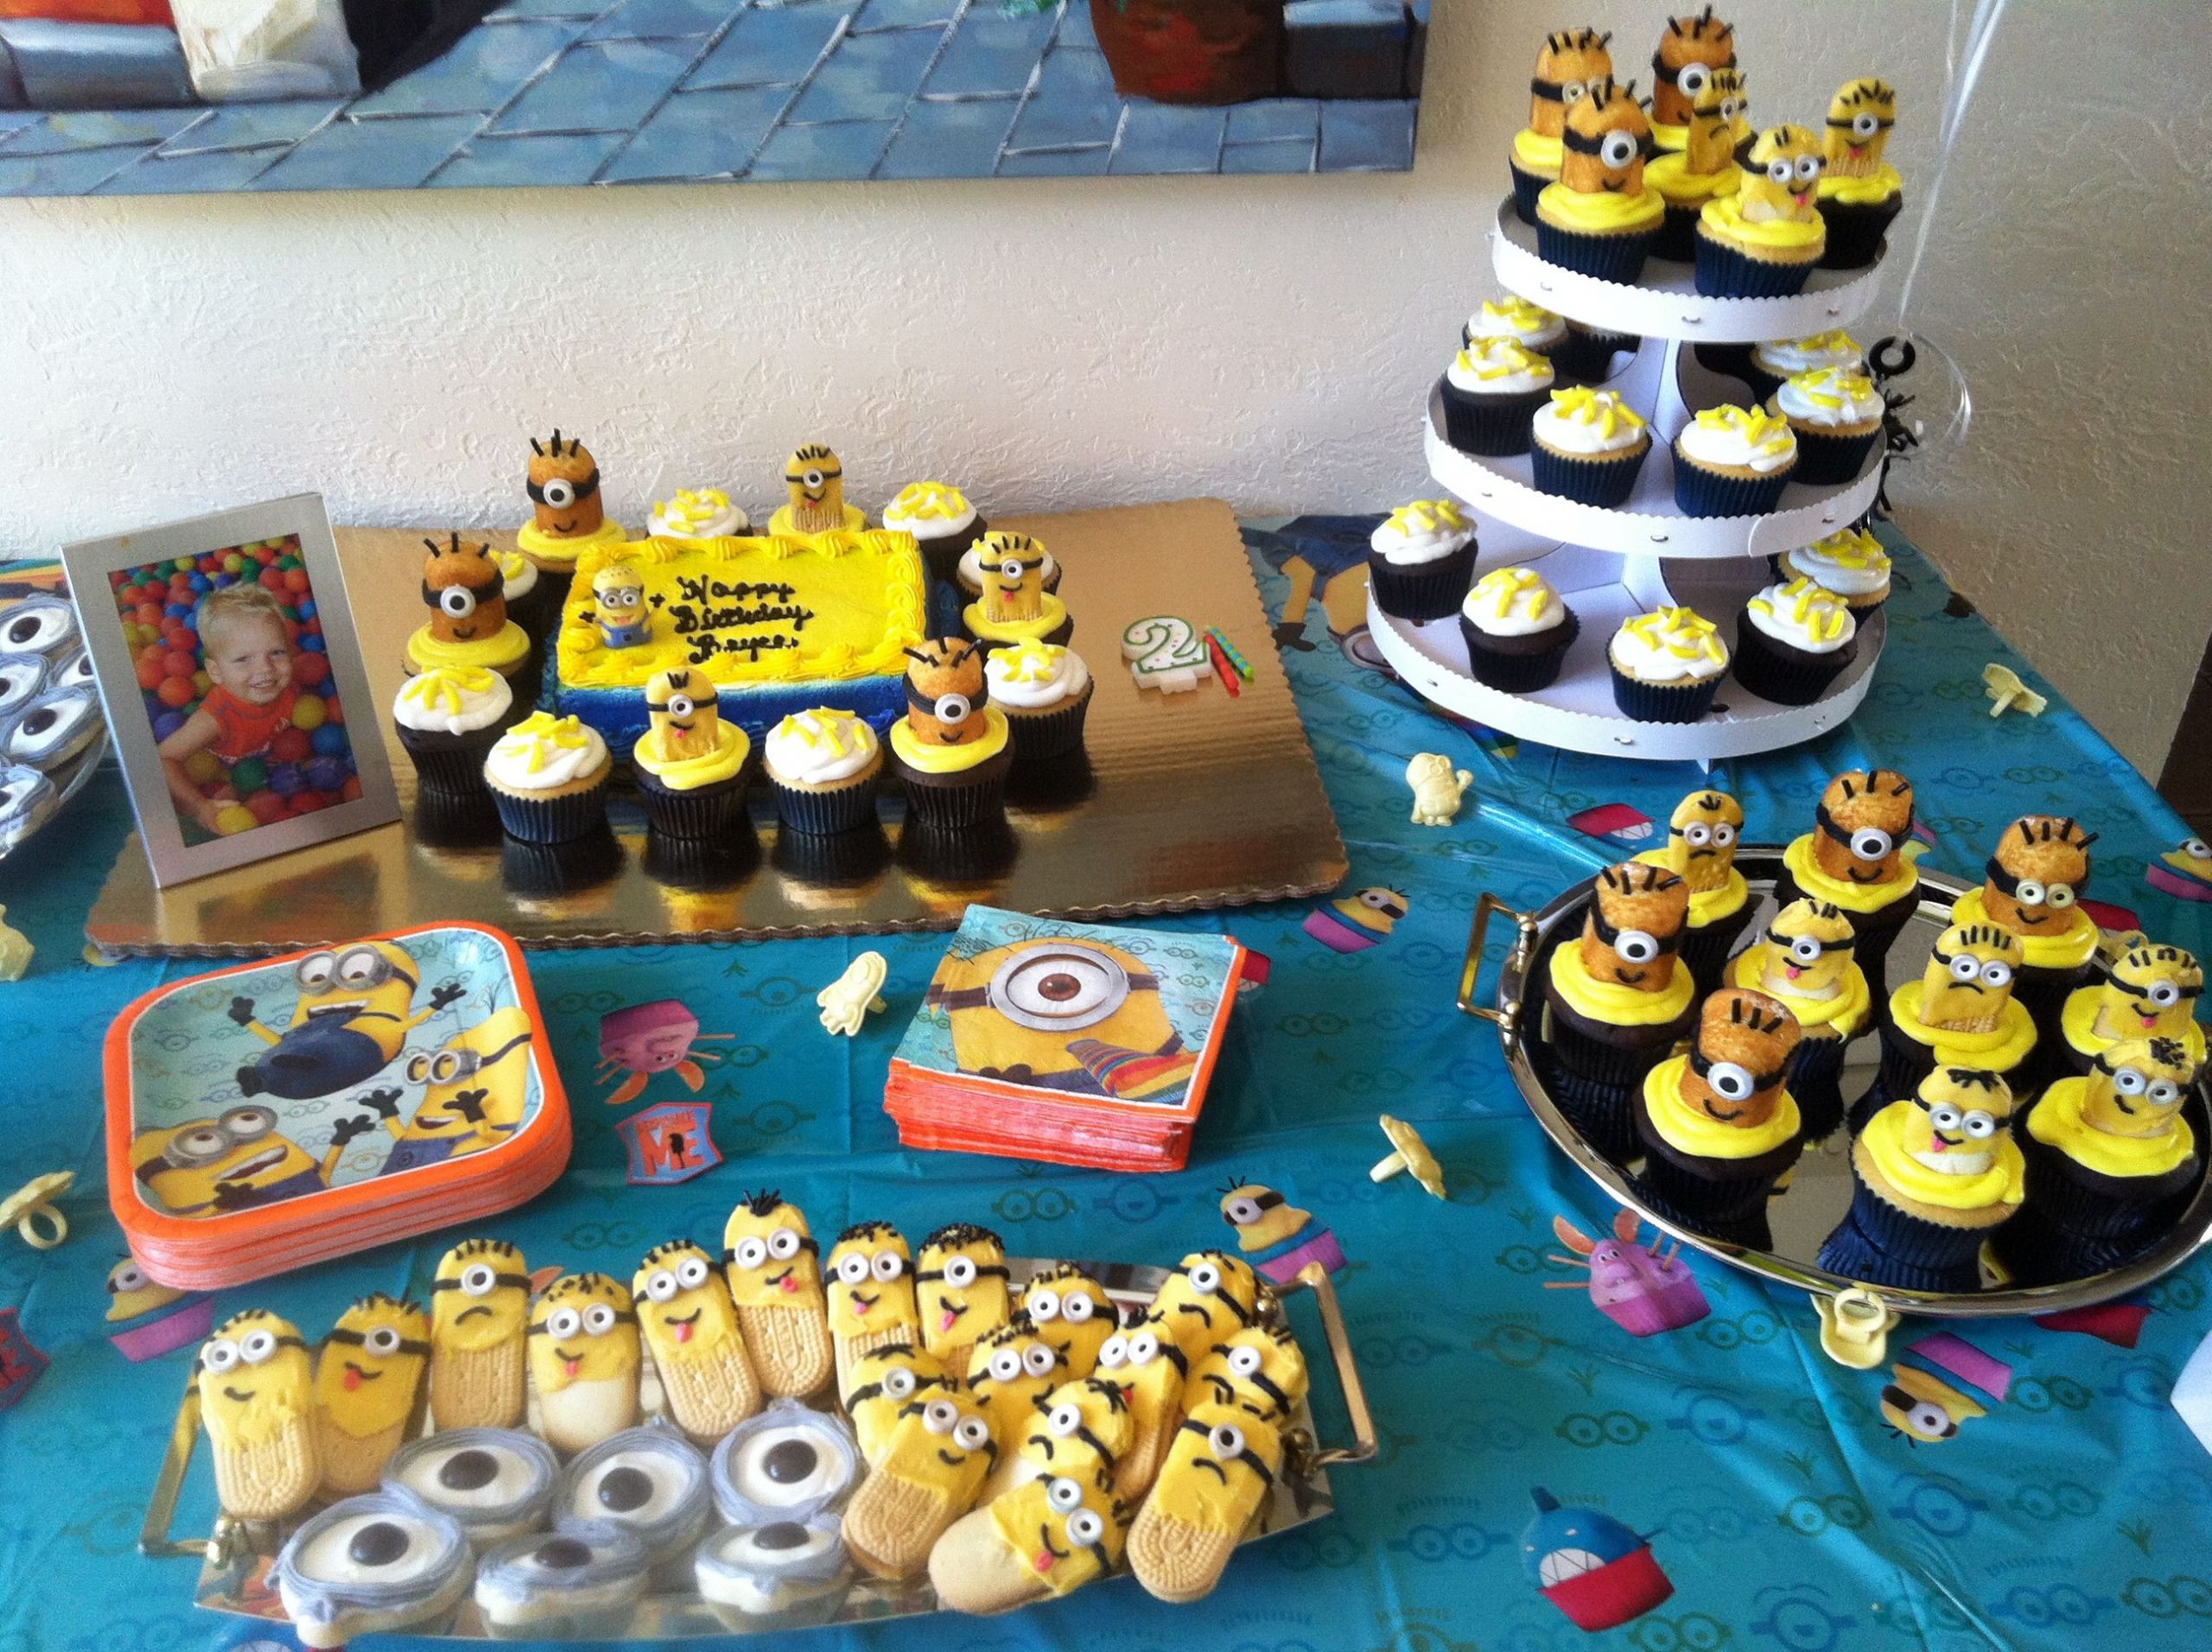 Summer Birthday Party Ideas For 4 Year Old Boy
 Minion birthday bash My 2 year old loved his theme